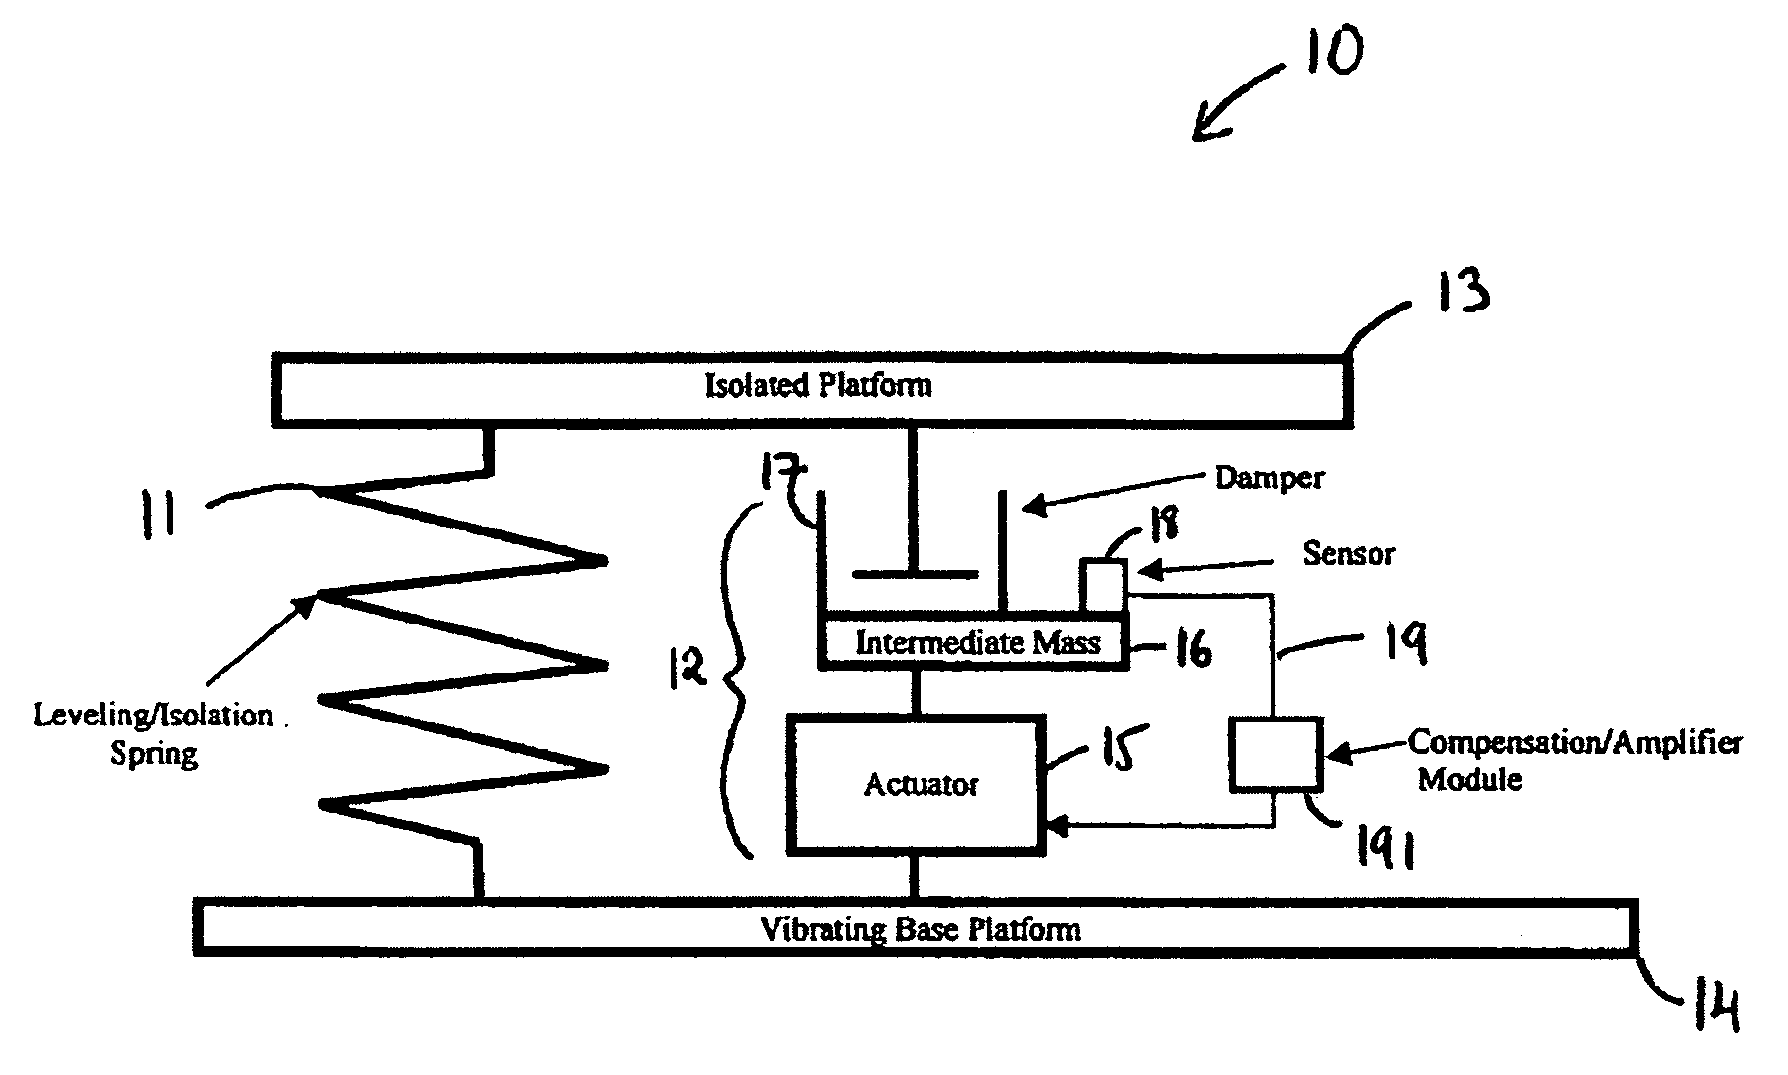 Systems and methods for active vibration damping